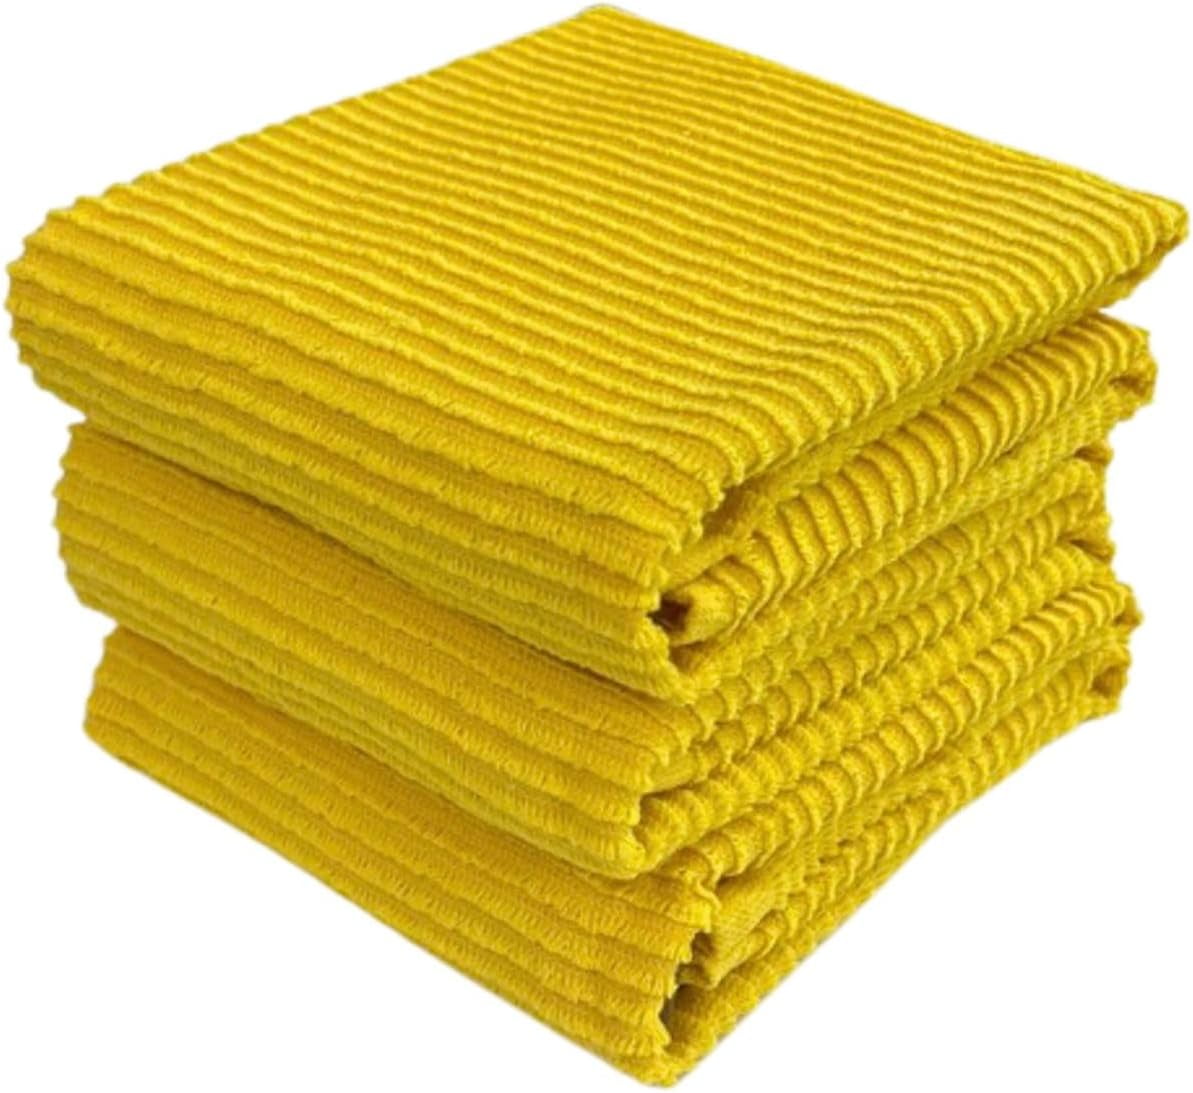 Zulay Kitchen Absorbent Kitchen Towels Cotton - Yellow, 3 - Baker's